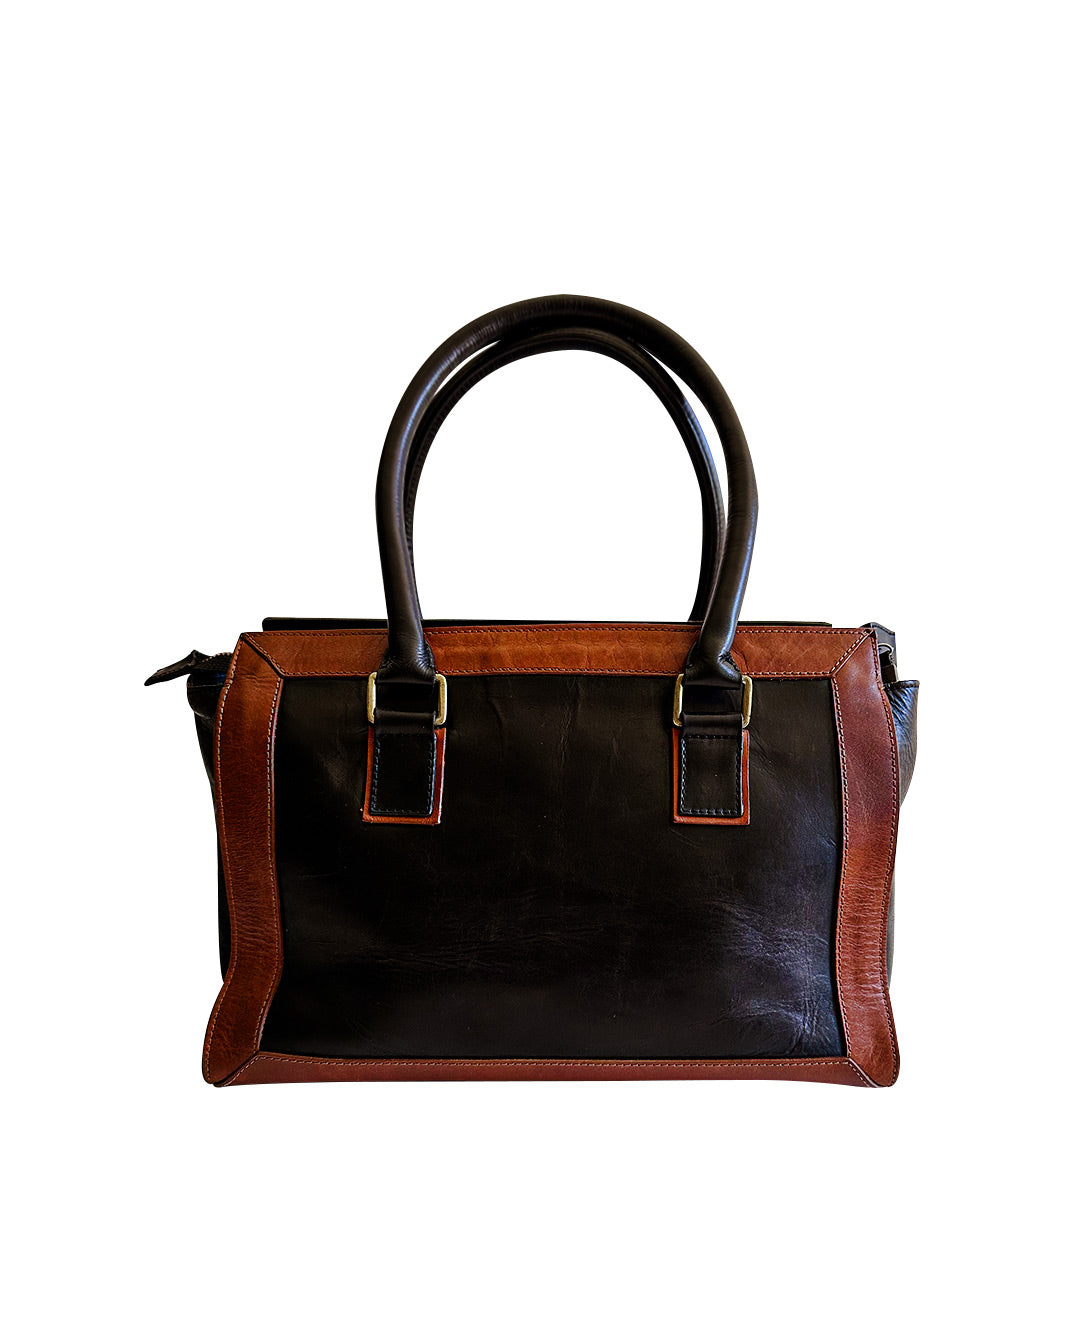 Second Chance Pre-Loved B/W Cowhide Brown Leather Bag: The lifecycle of our Bixi bags